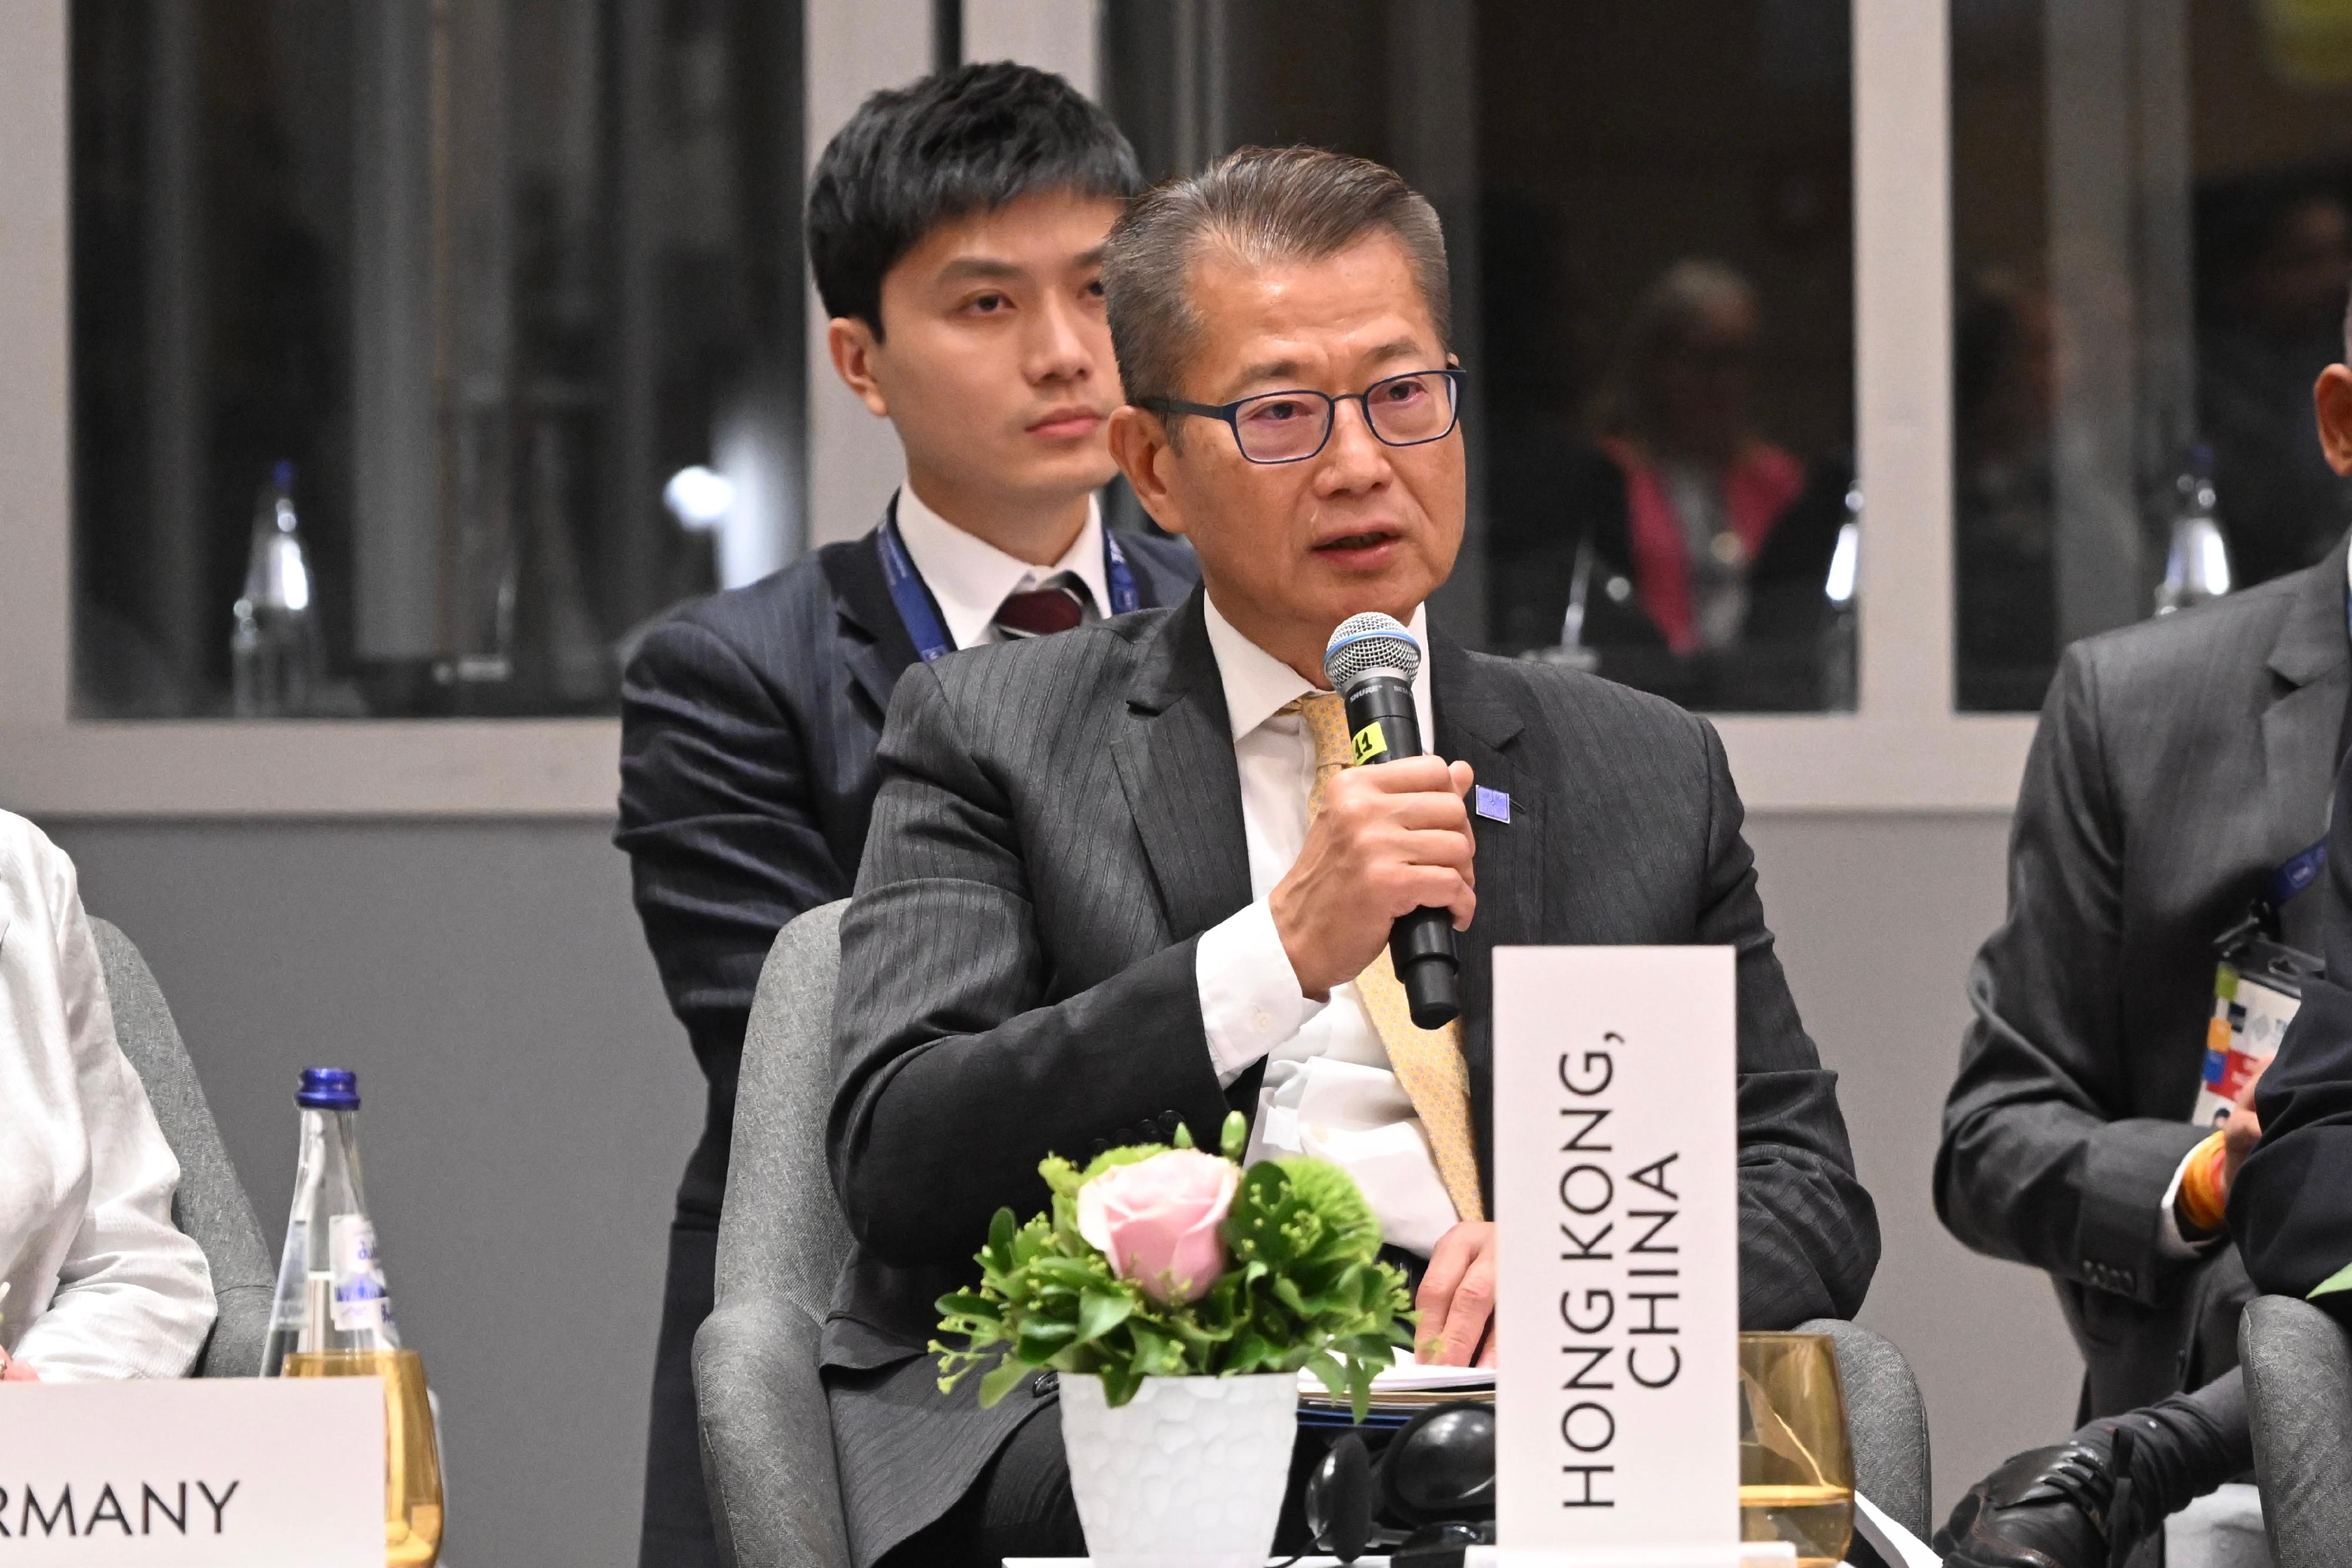 The Financial Secretary, Mr Paul Chan, continued his attendance yesterday (May 4, Tbilisi time) at the 57th Annual Meeting of the Board of Governors of the Asian Development Bank in Tbilisi, Georgia. Photo shows Mr Chan speaking at the Plenary Session of the Meeting.